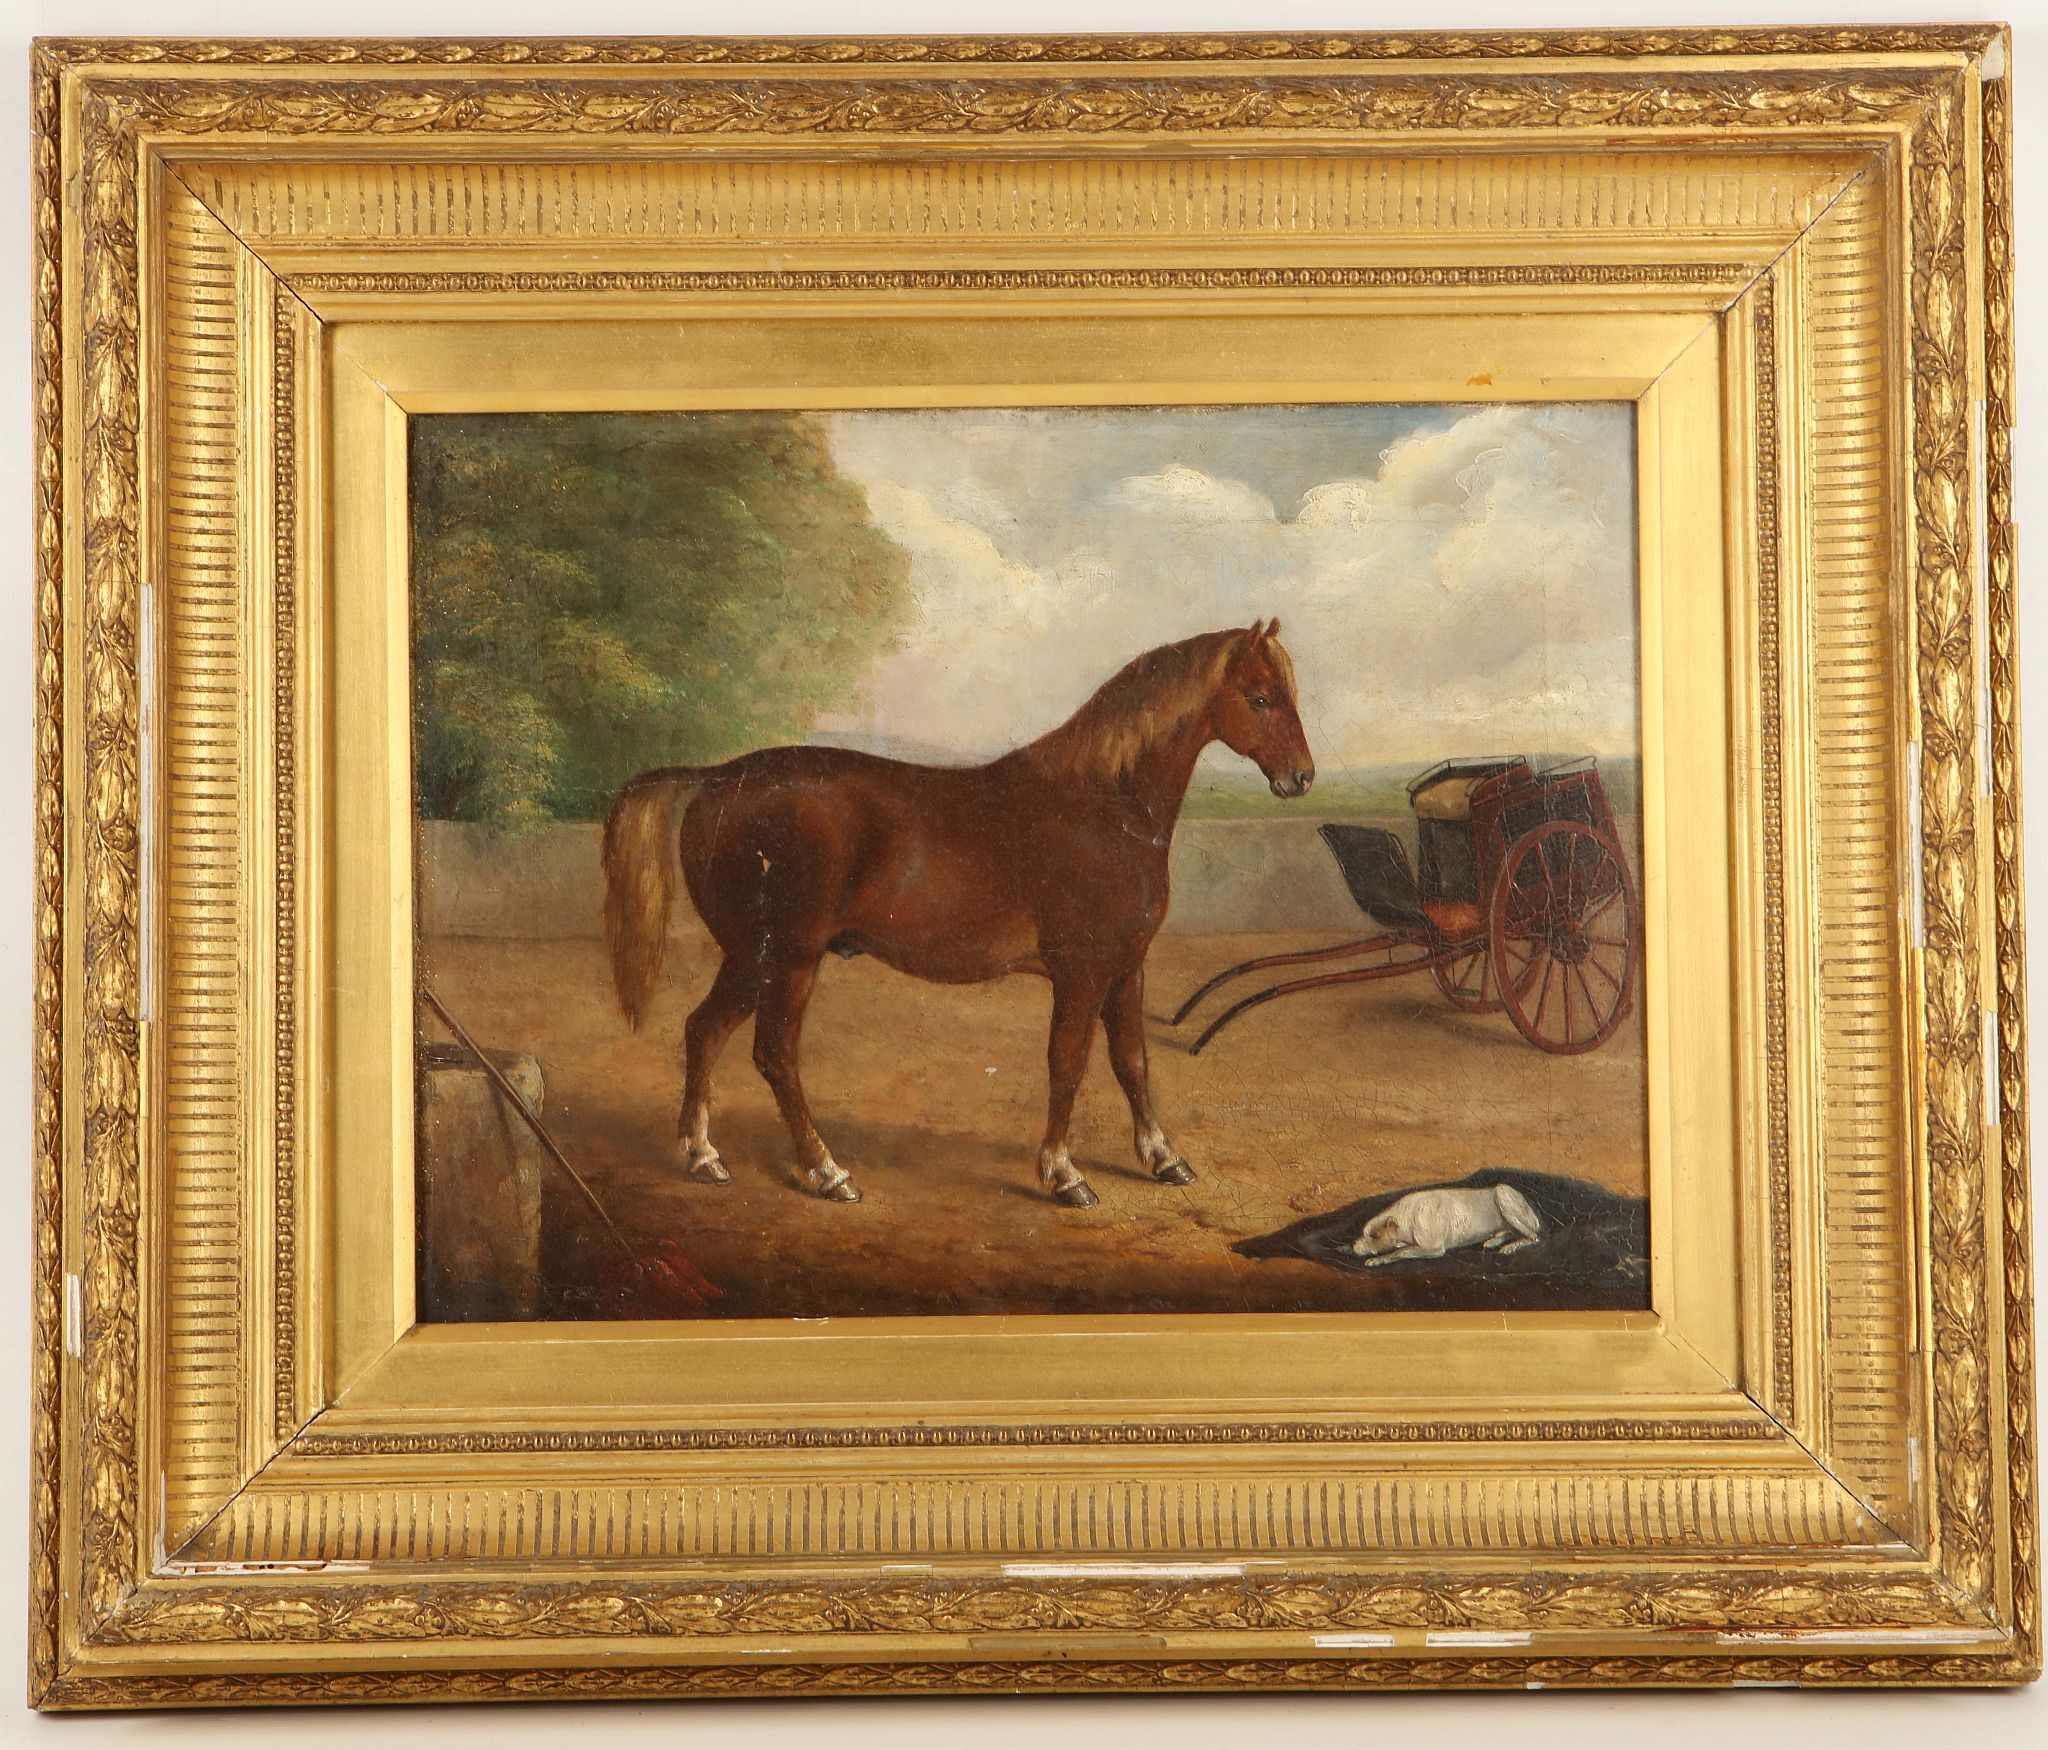 A Victorian oil on canvas of a horse with wagon in background, gilt framed.